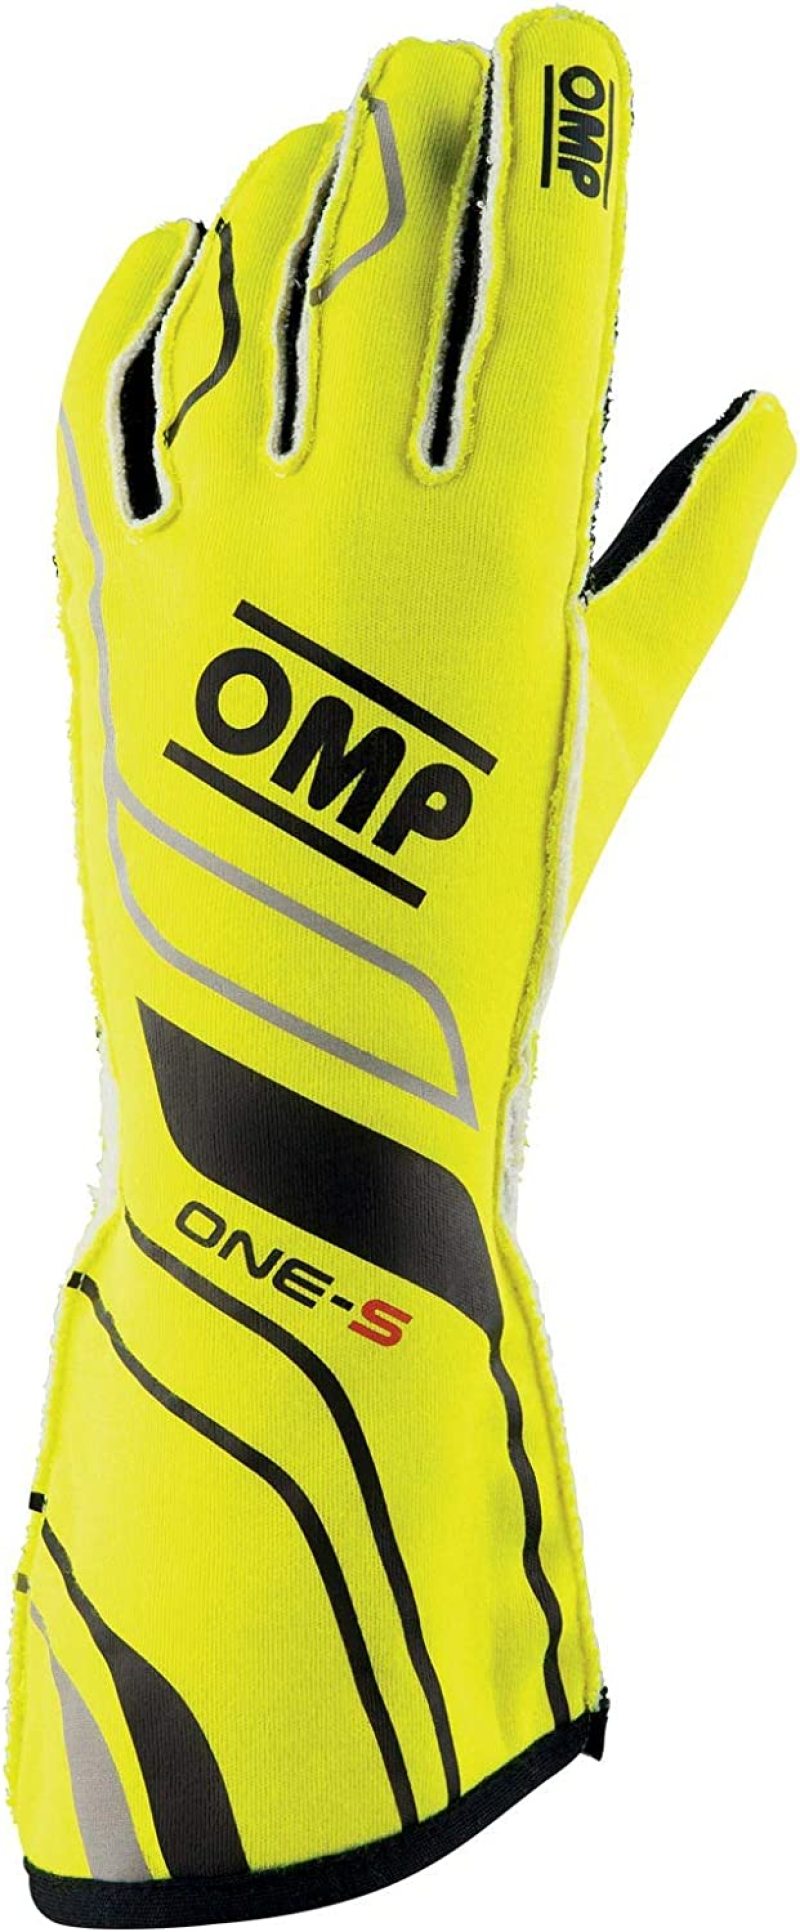 OMP One-S Gloves Fluorescent Yellow - Size M Fia 8556-2018 - IB0-0770-A01-099-M